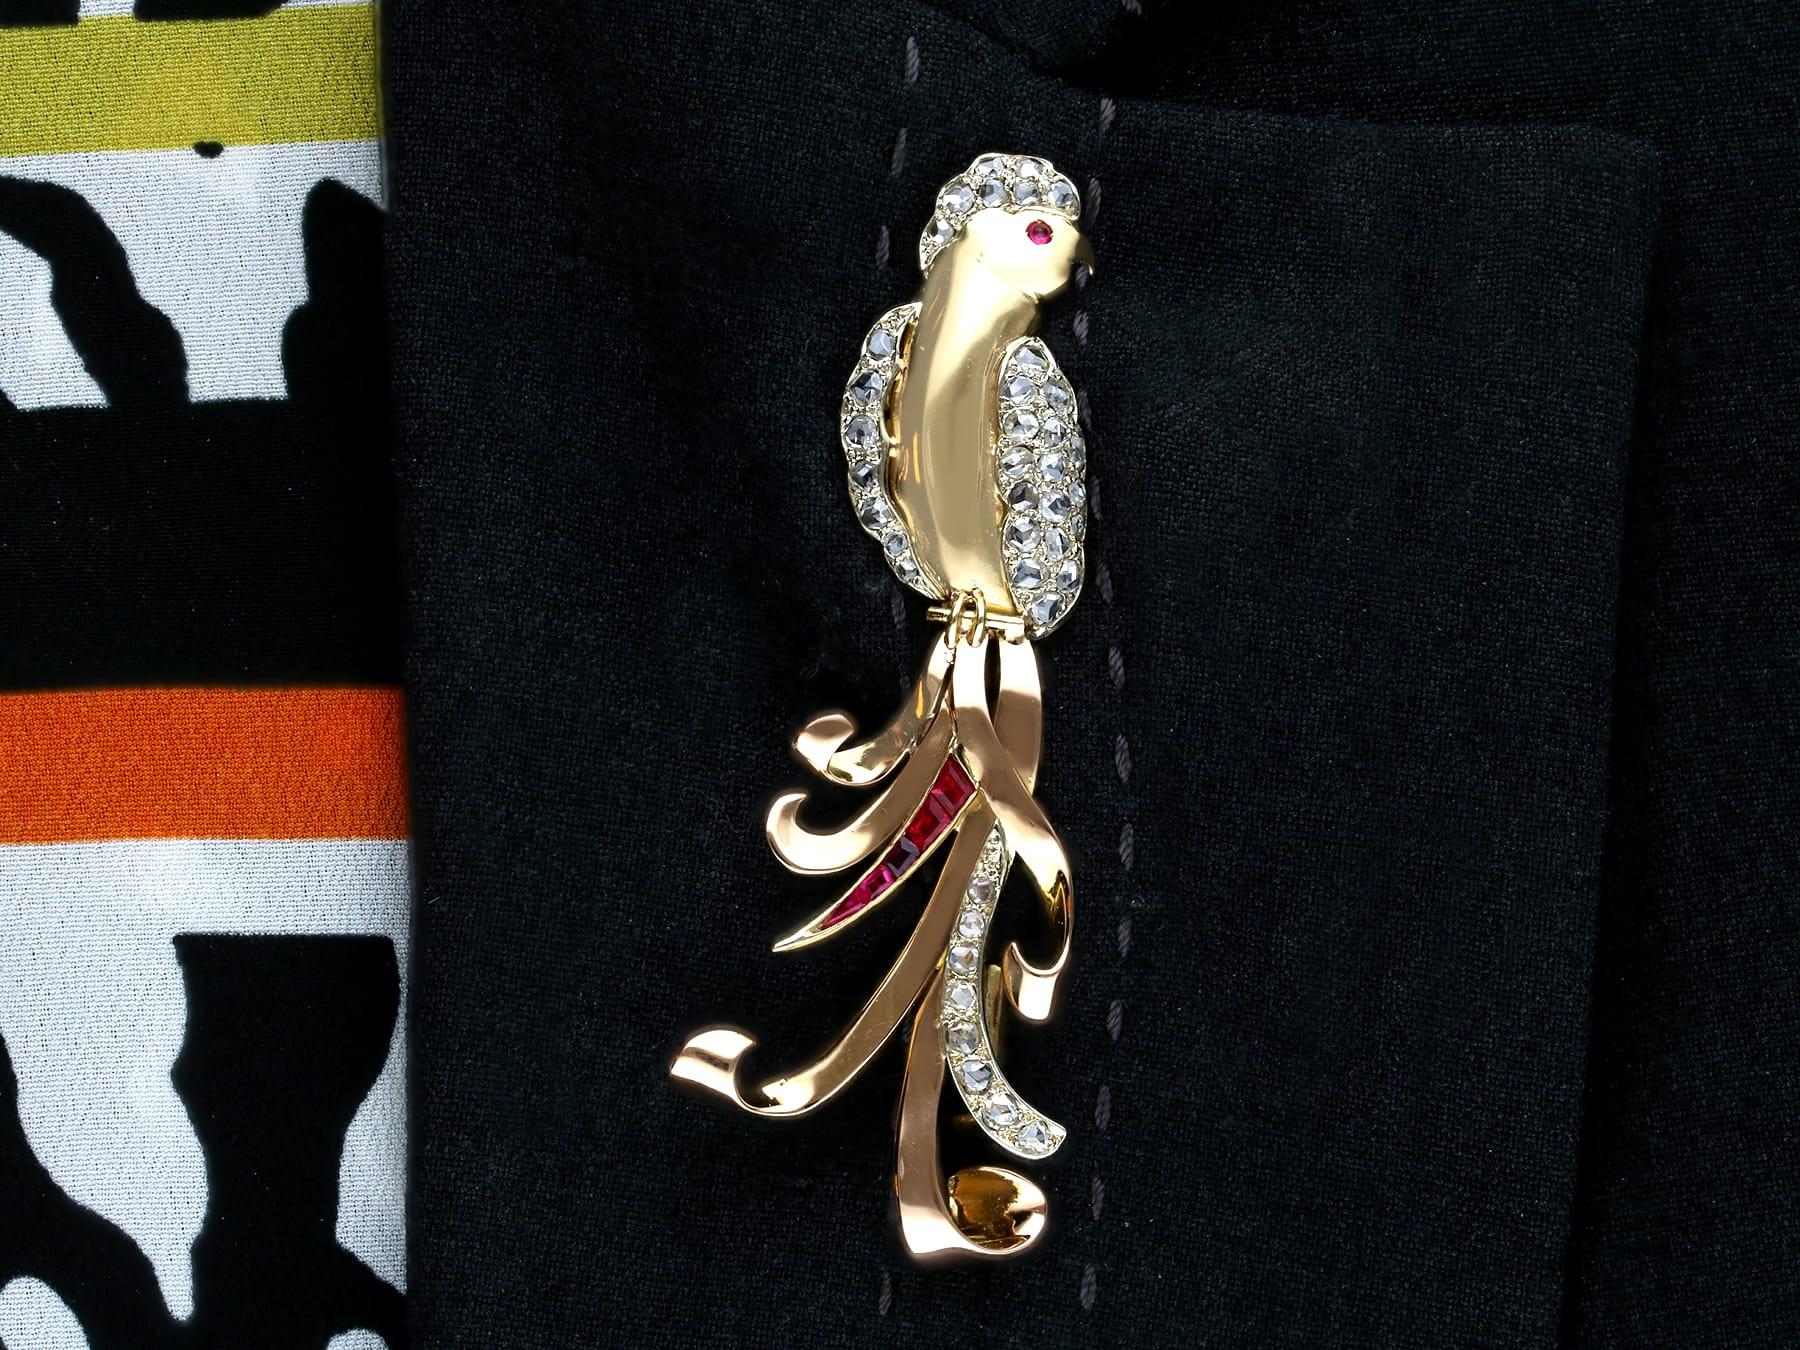 Vintage 1940s 1.16 Carat Diamond and Ruby 18k Yellow Gold Bird Brooch For Sale 3